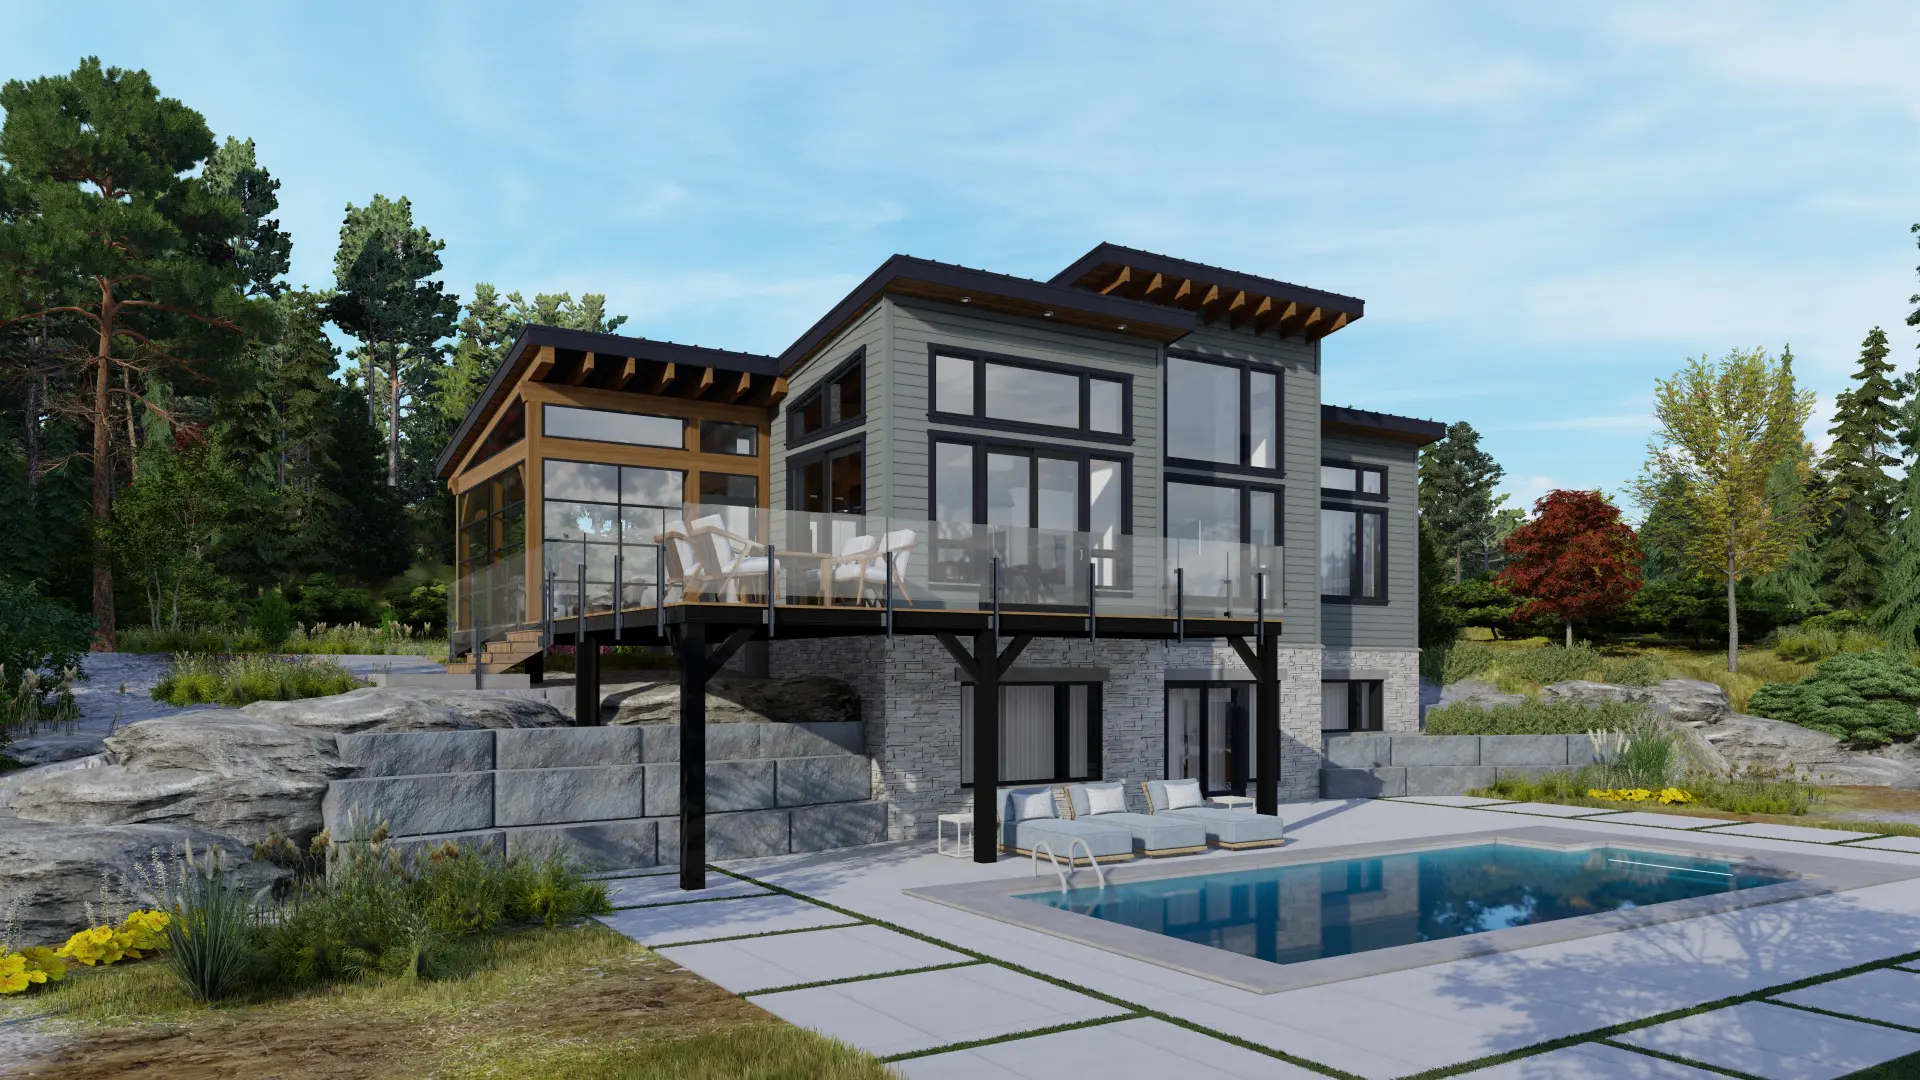 modern bungalow house plans contemporary designs open concept house modern timber frame home Normerica Kershaw 3808 Exterior Back Side Pool